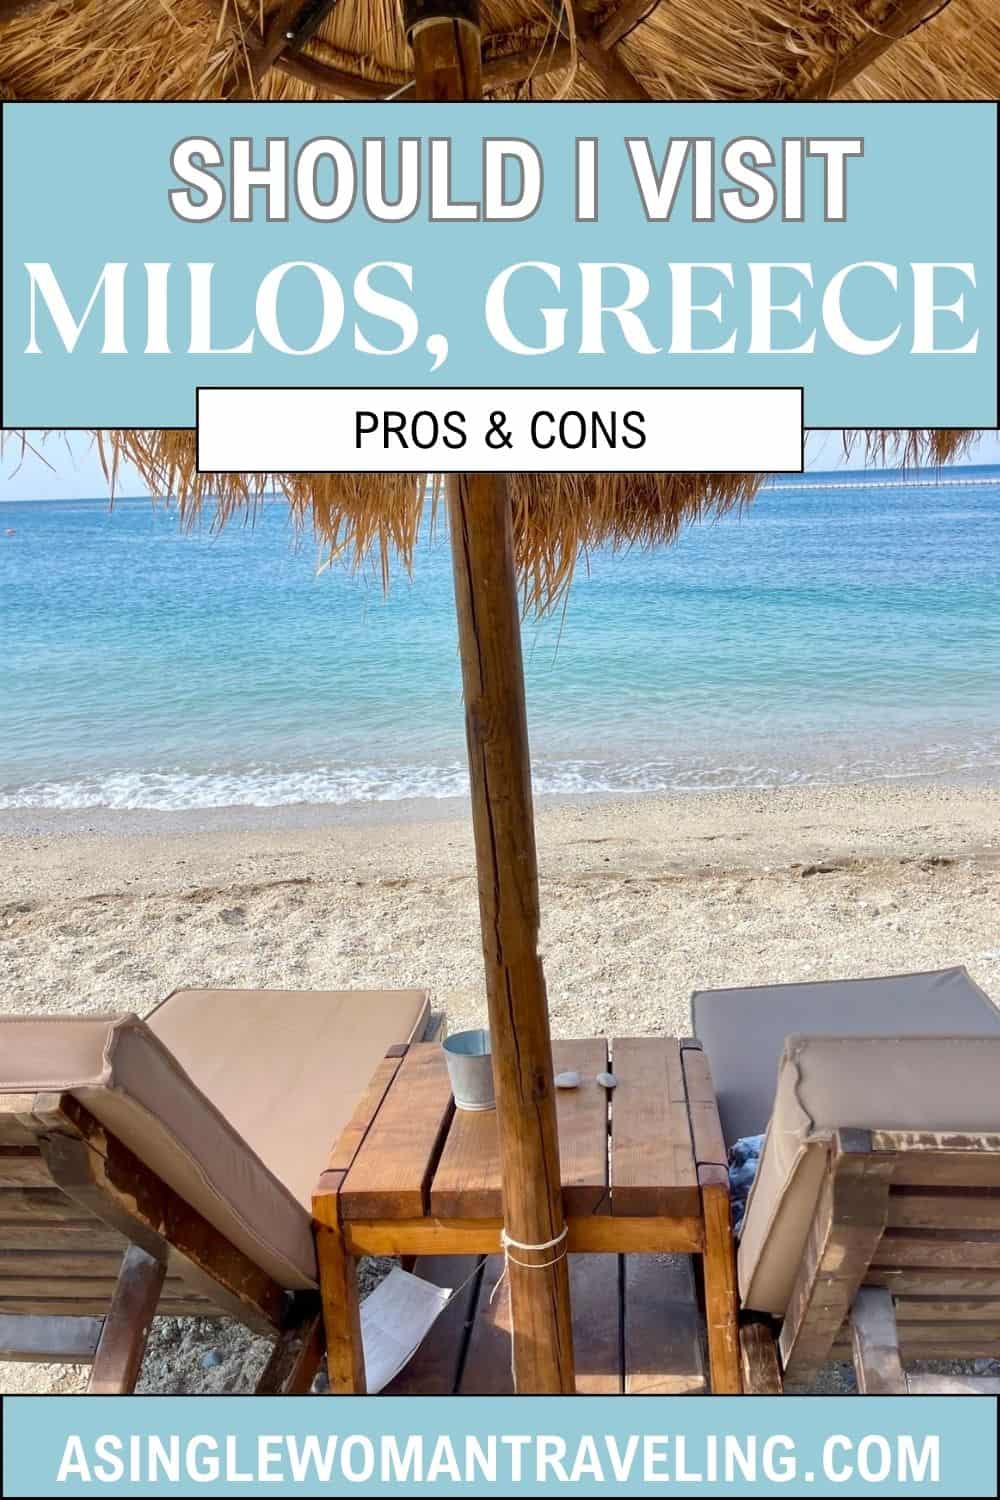 This is a promotional image for a travel blog, featuring a beach scene from Milos, Greece. The main focus is on the comfort provided to visitors, with a straw sunshade, a wooden table, and a comfortable beach chair positioned on the sandy beach, overlooking the clear blue waters.